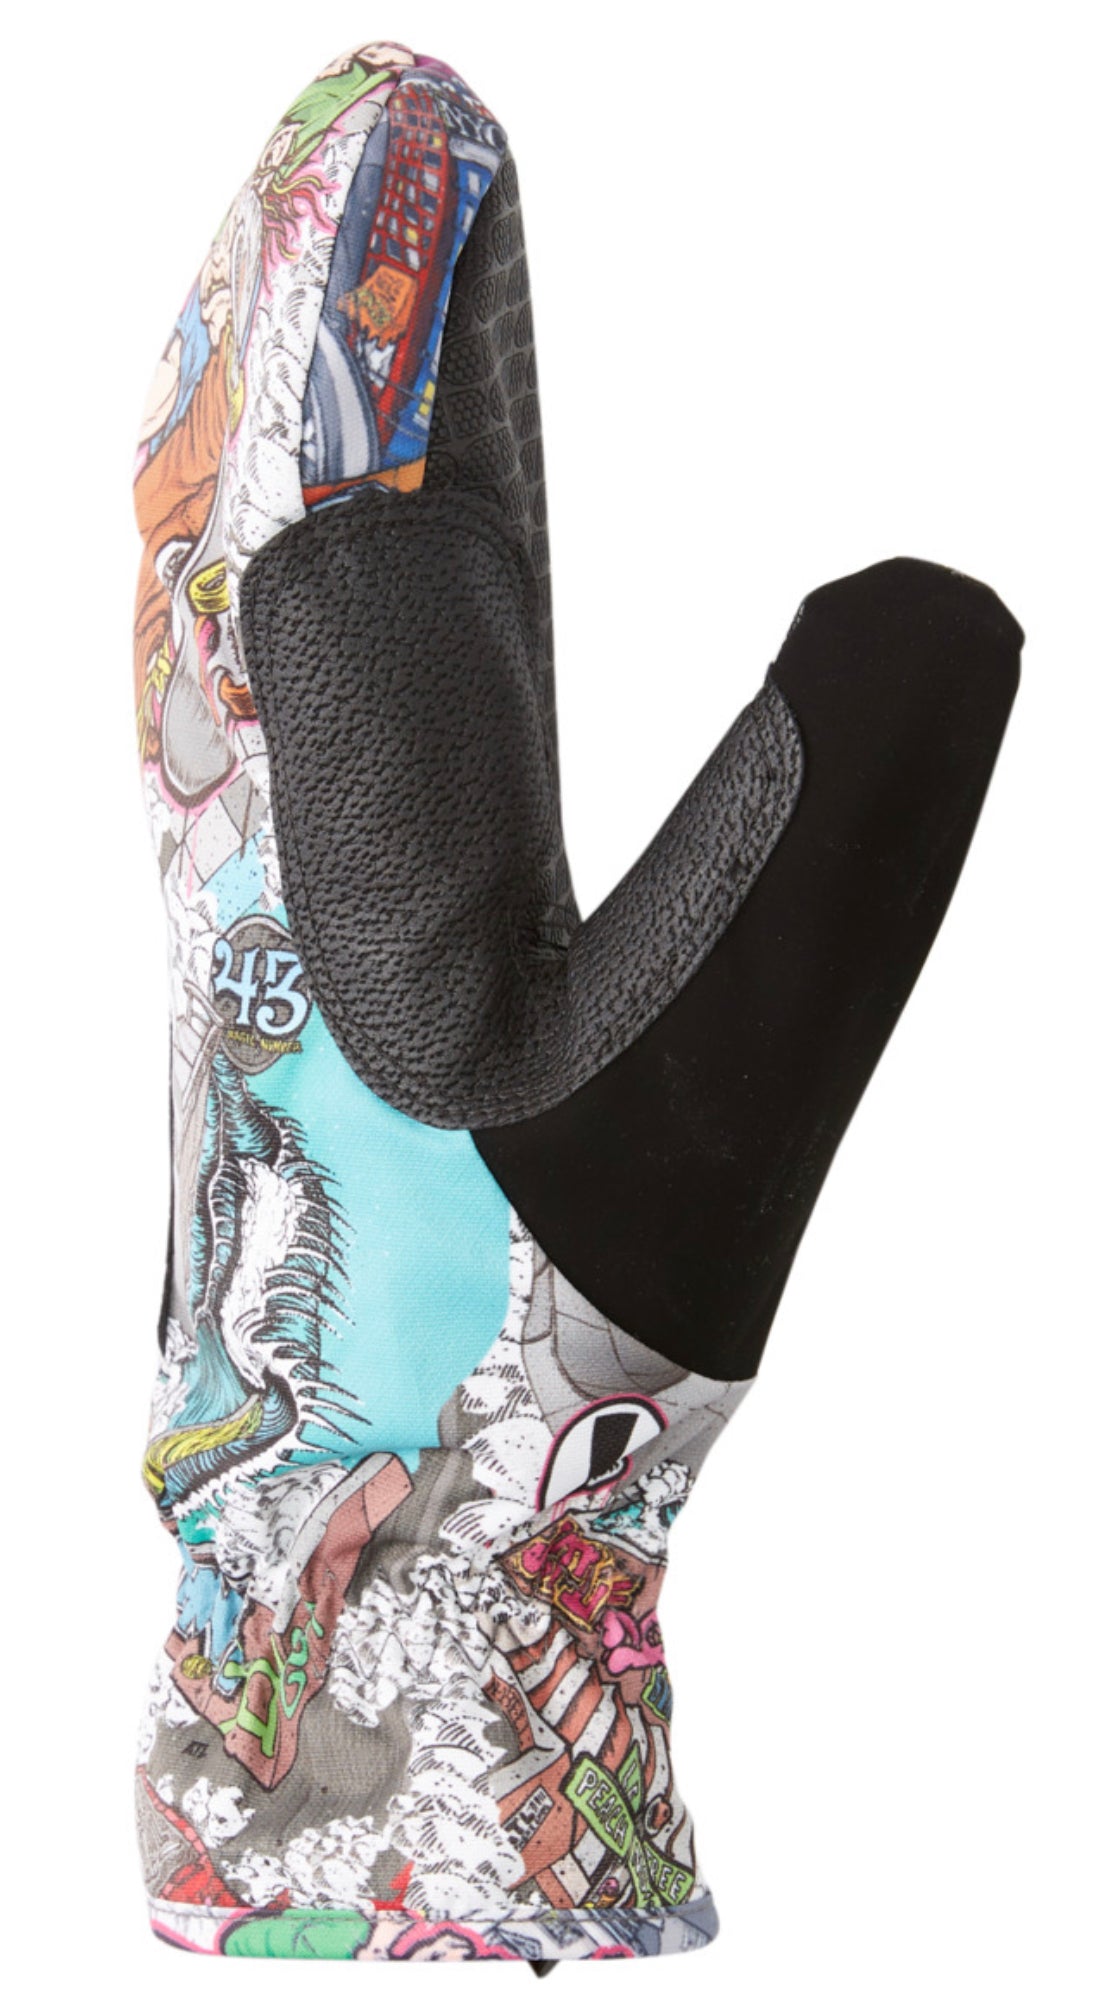 DC - Andy Howell x Tribute Snowboard Mitts